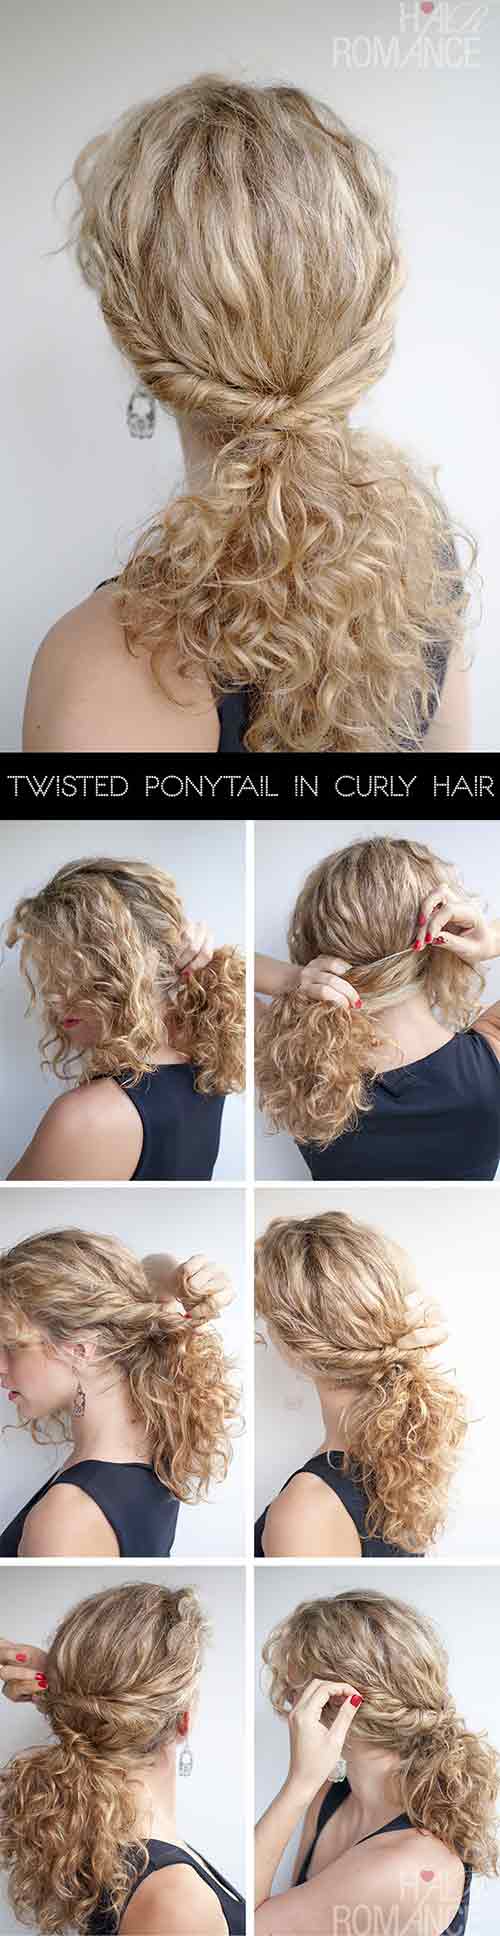 Twisted ponytail hairstyle for curly hair